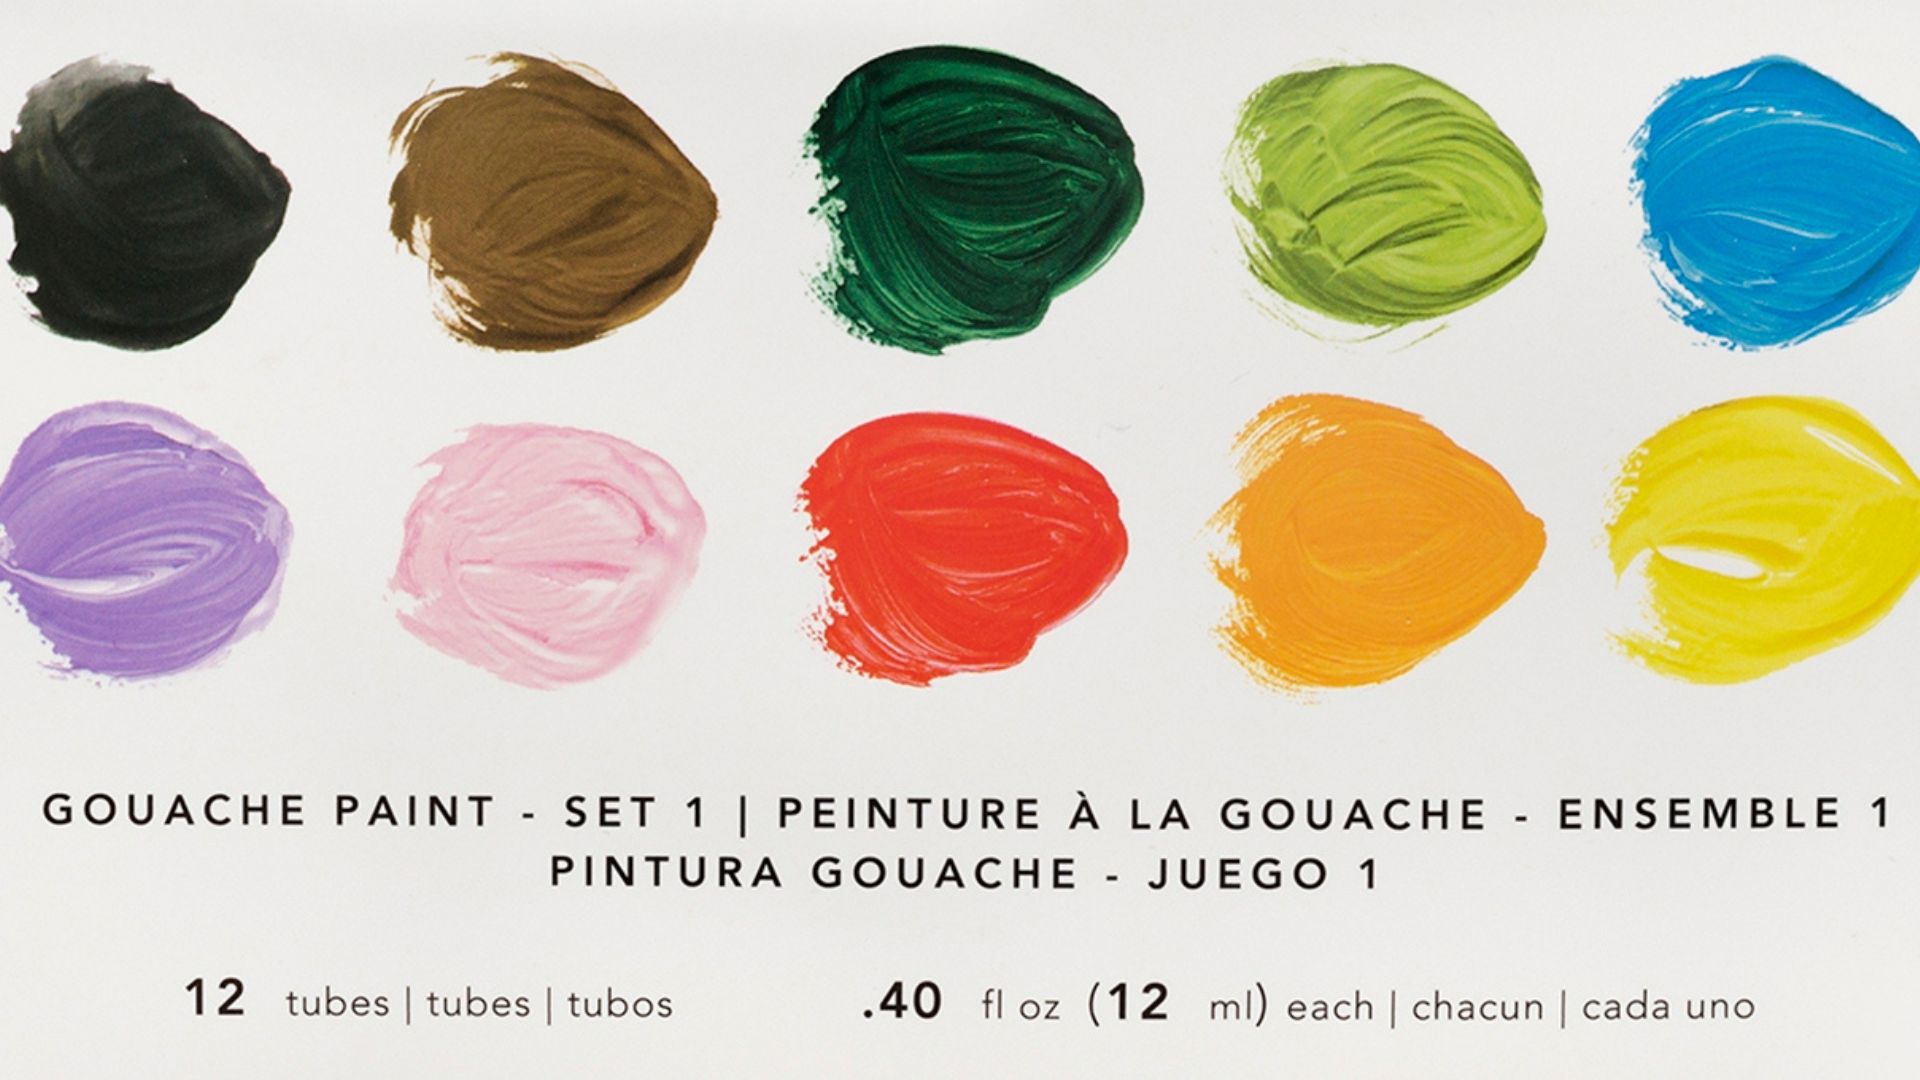 What Is Gouache Paint Used For?